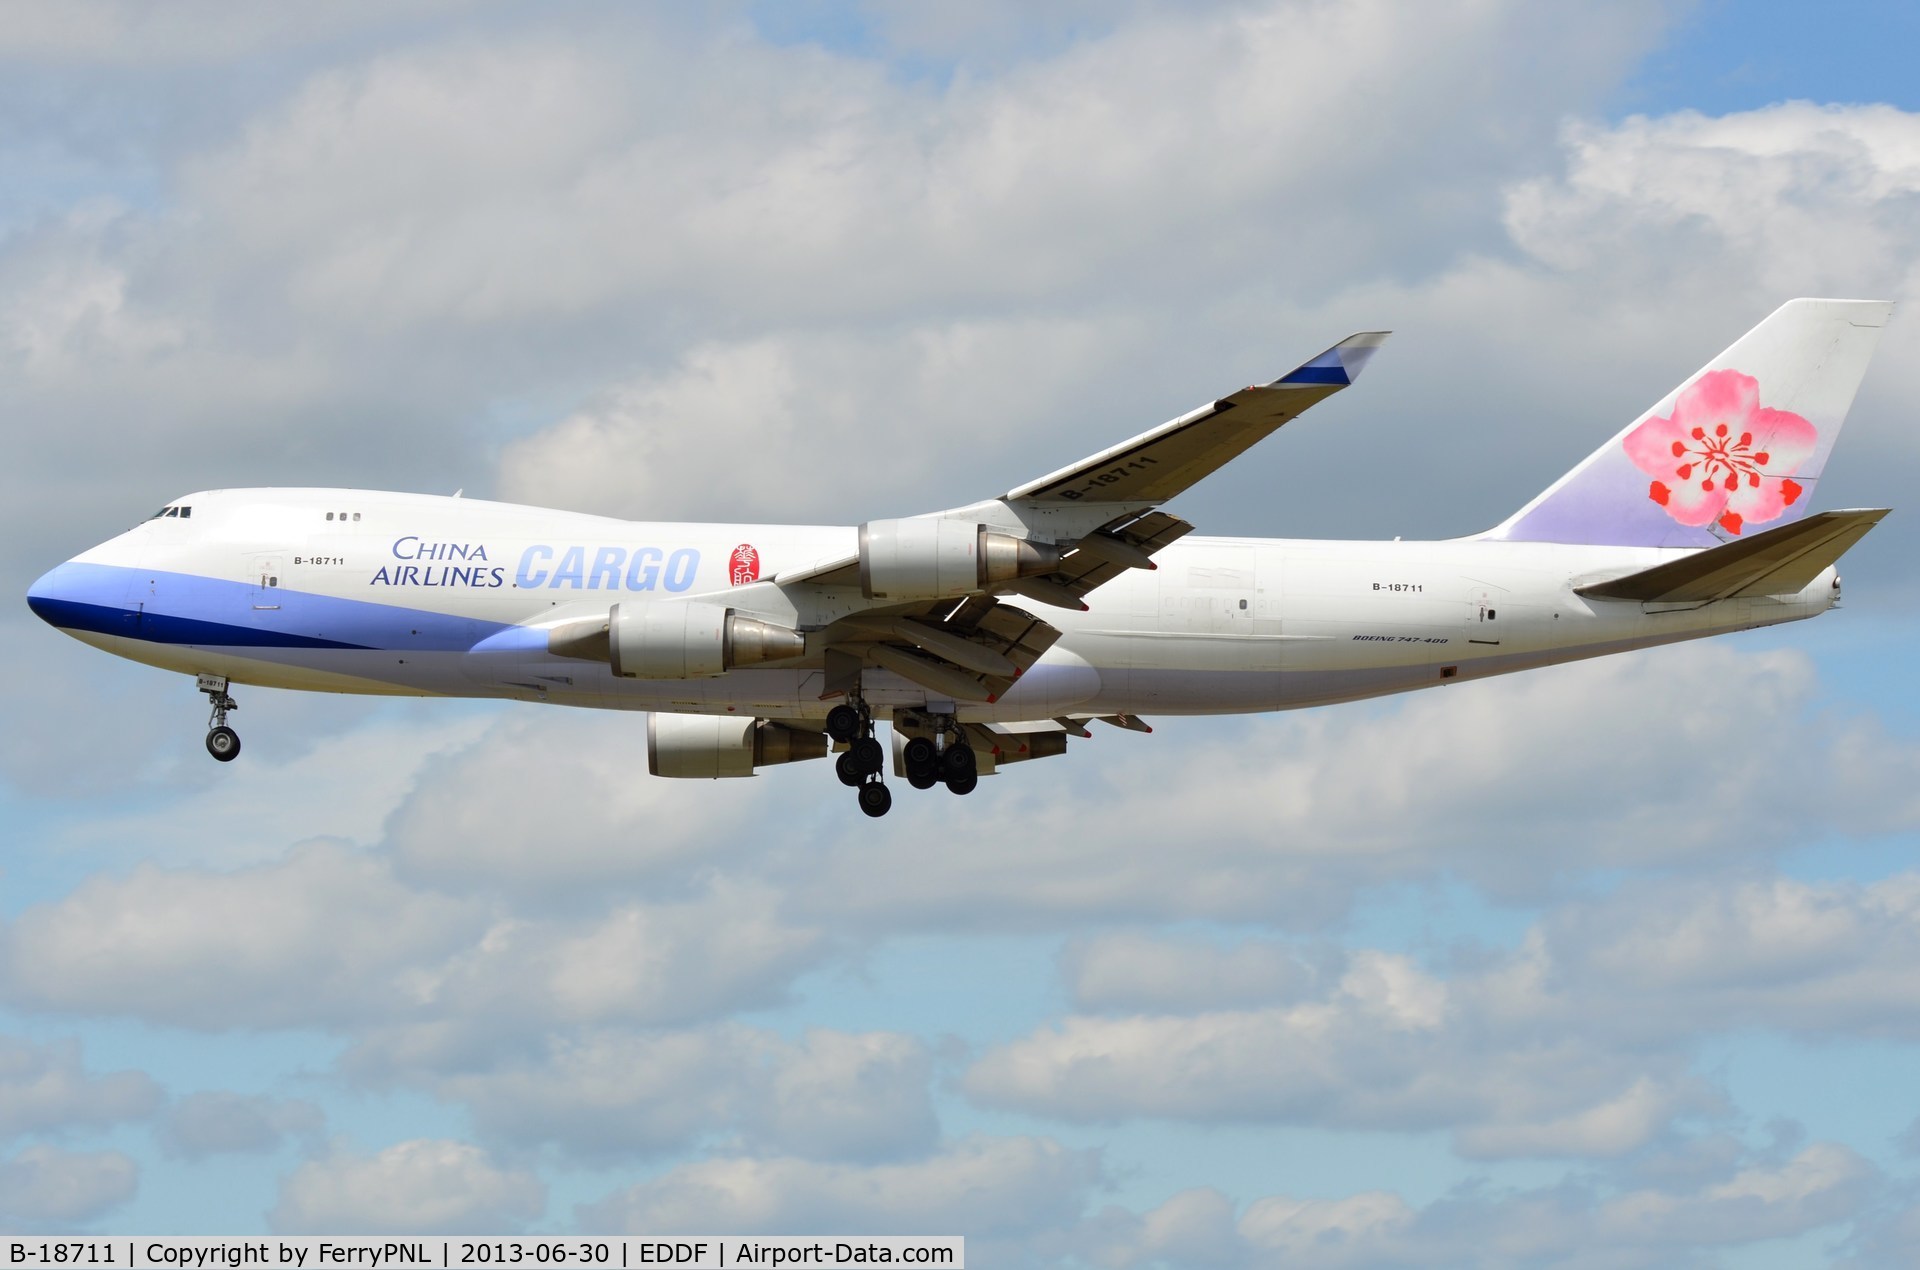 B-18711, 2002 Boeing 747-409F/SCD C/N 30768, China Airlines B744 freighter